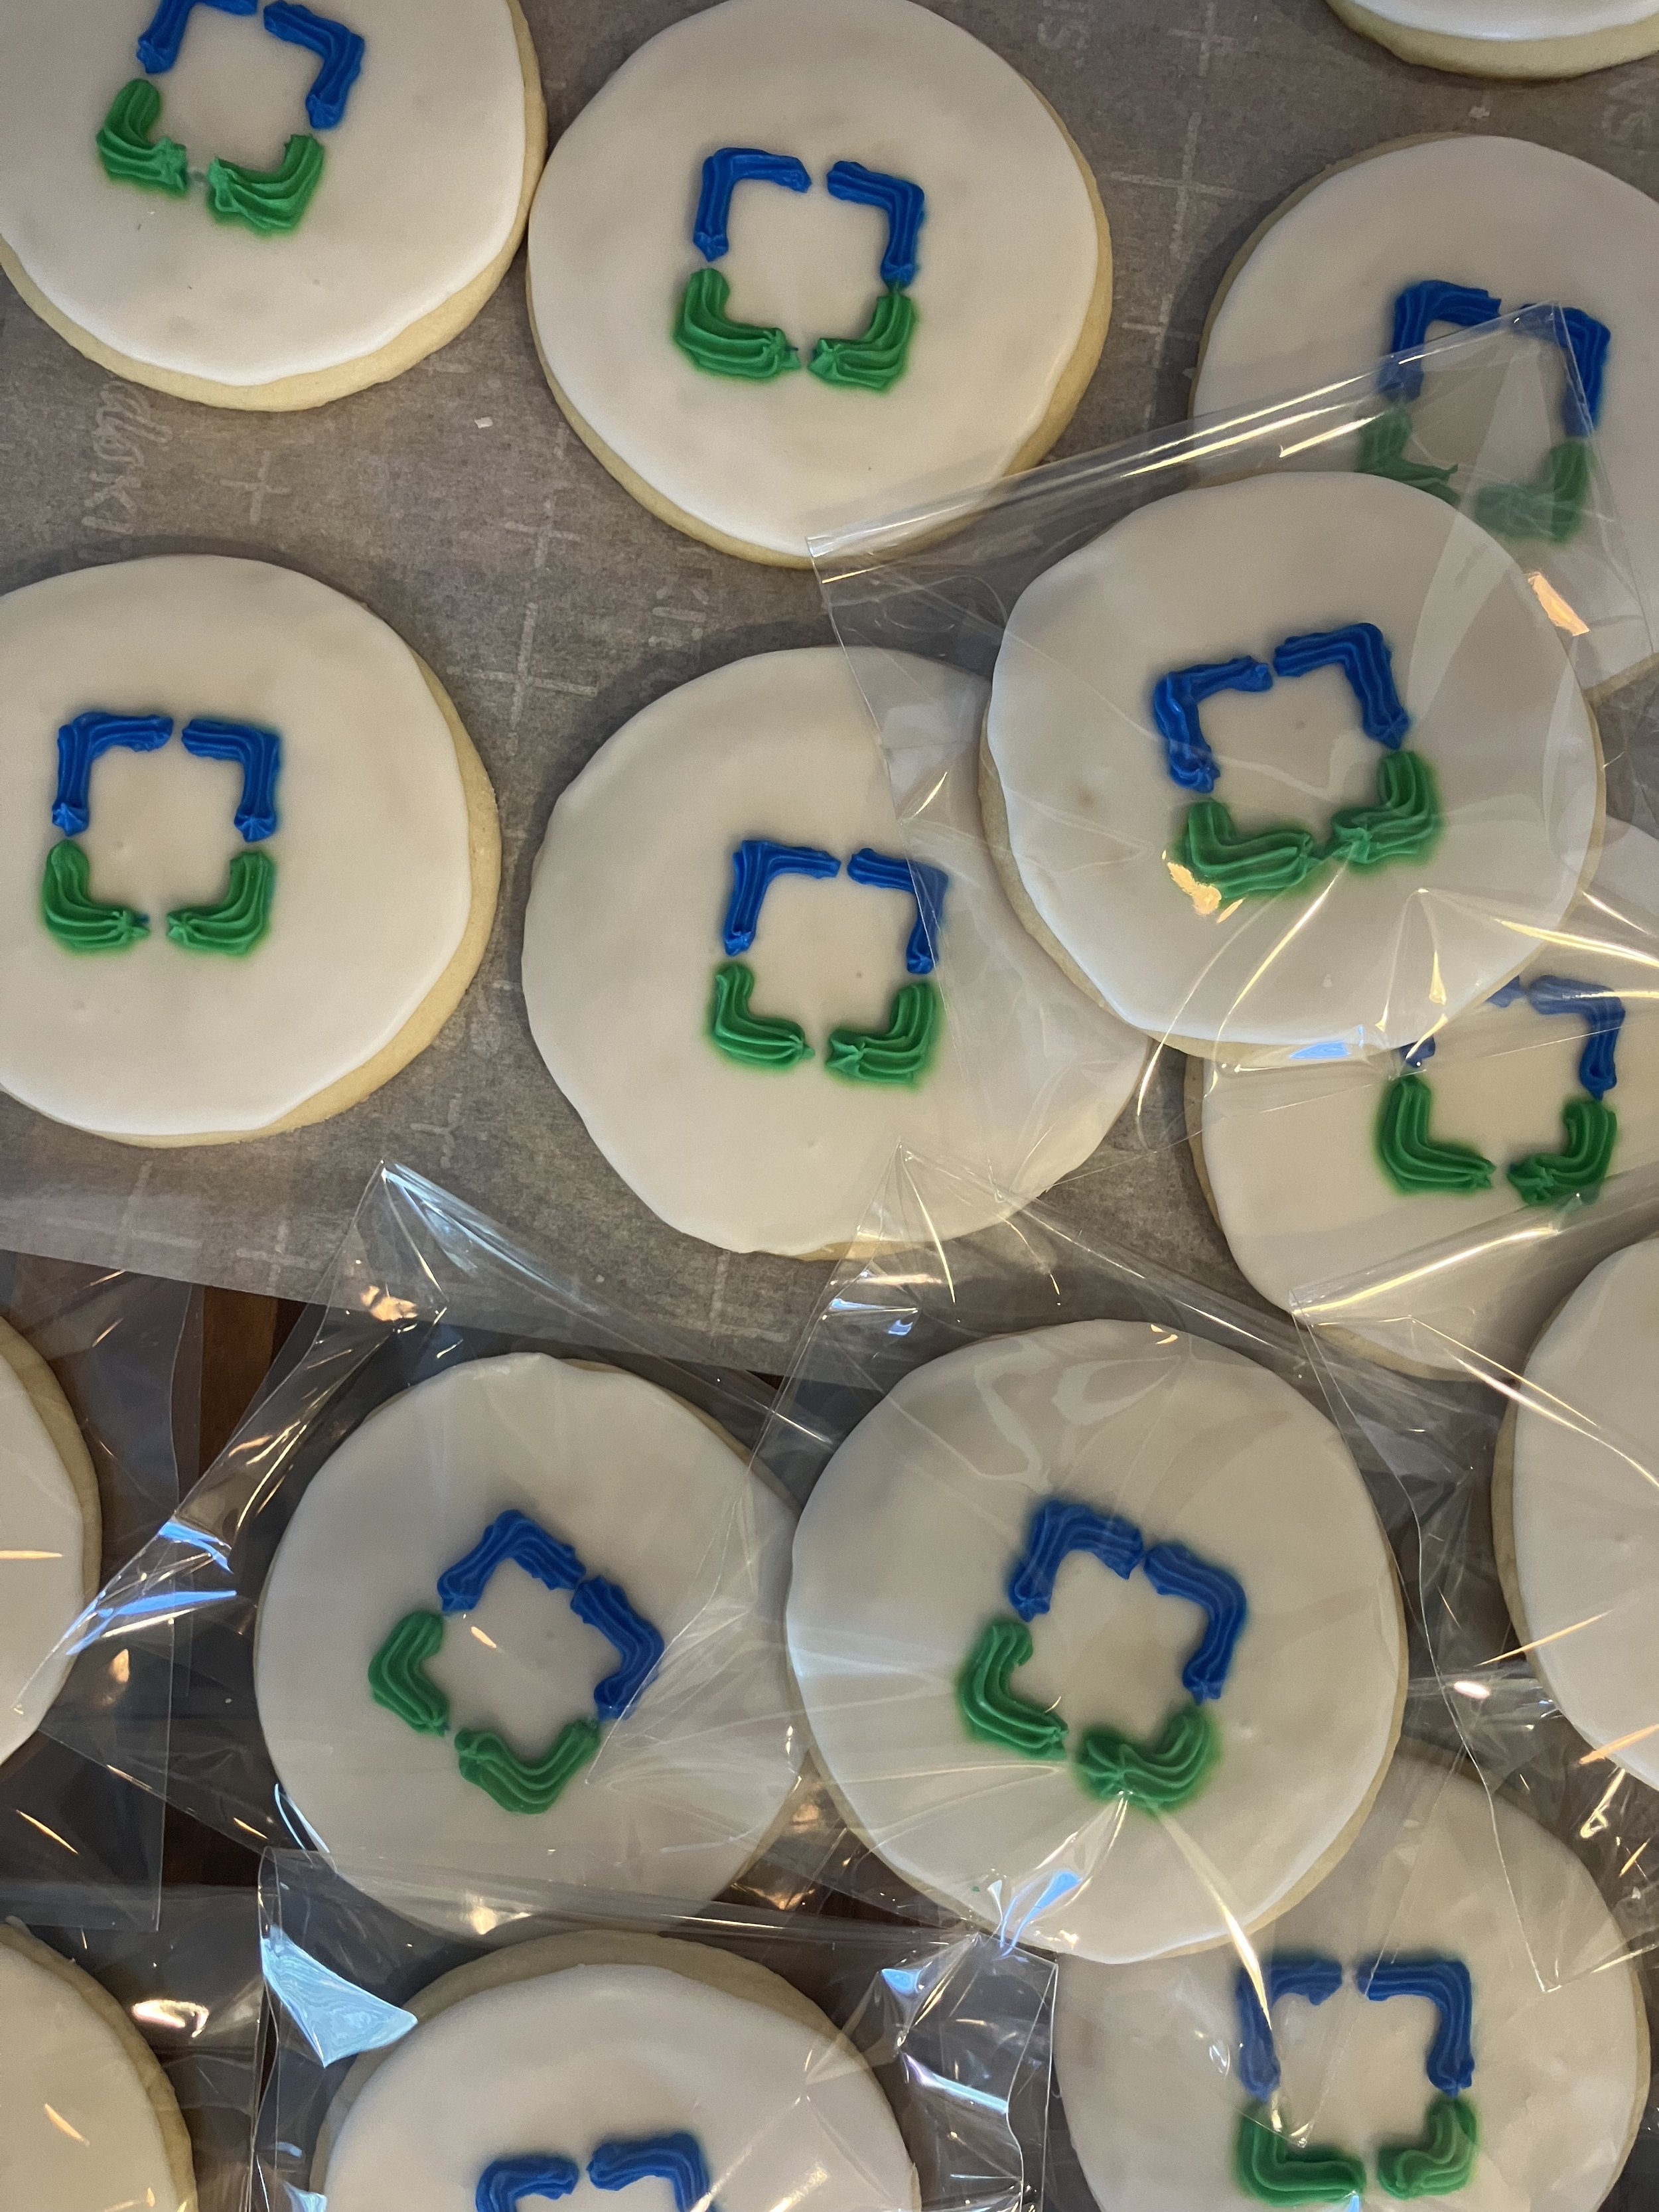  Cleveland Clinic logo cookies.  